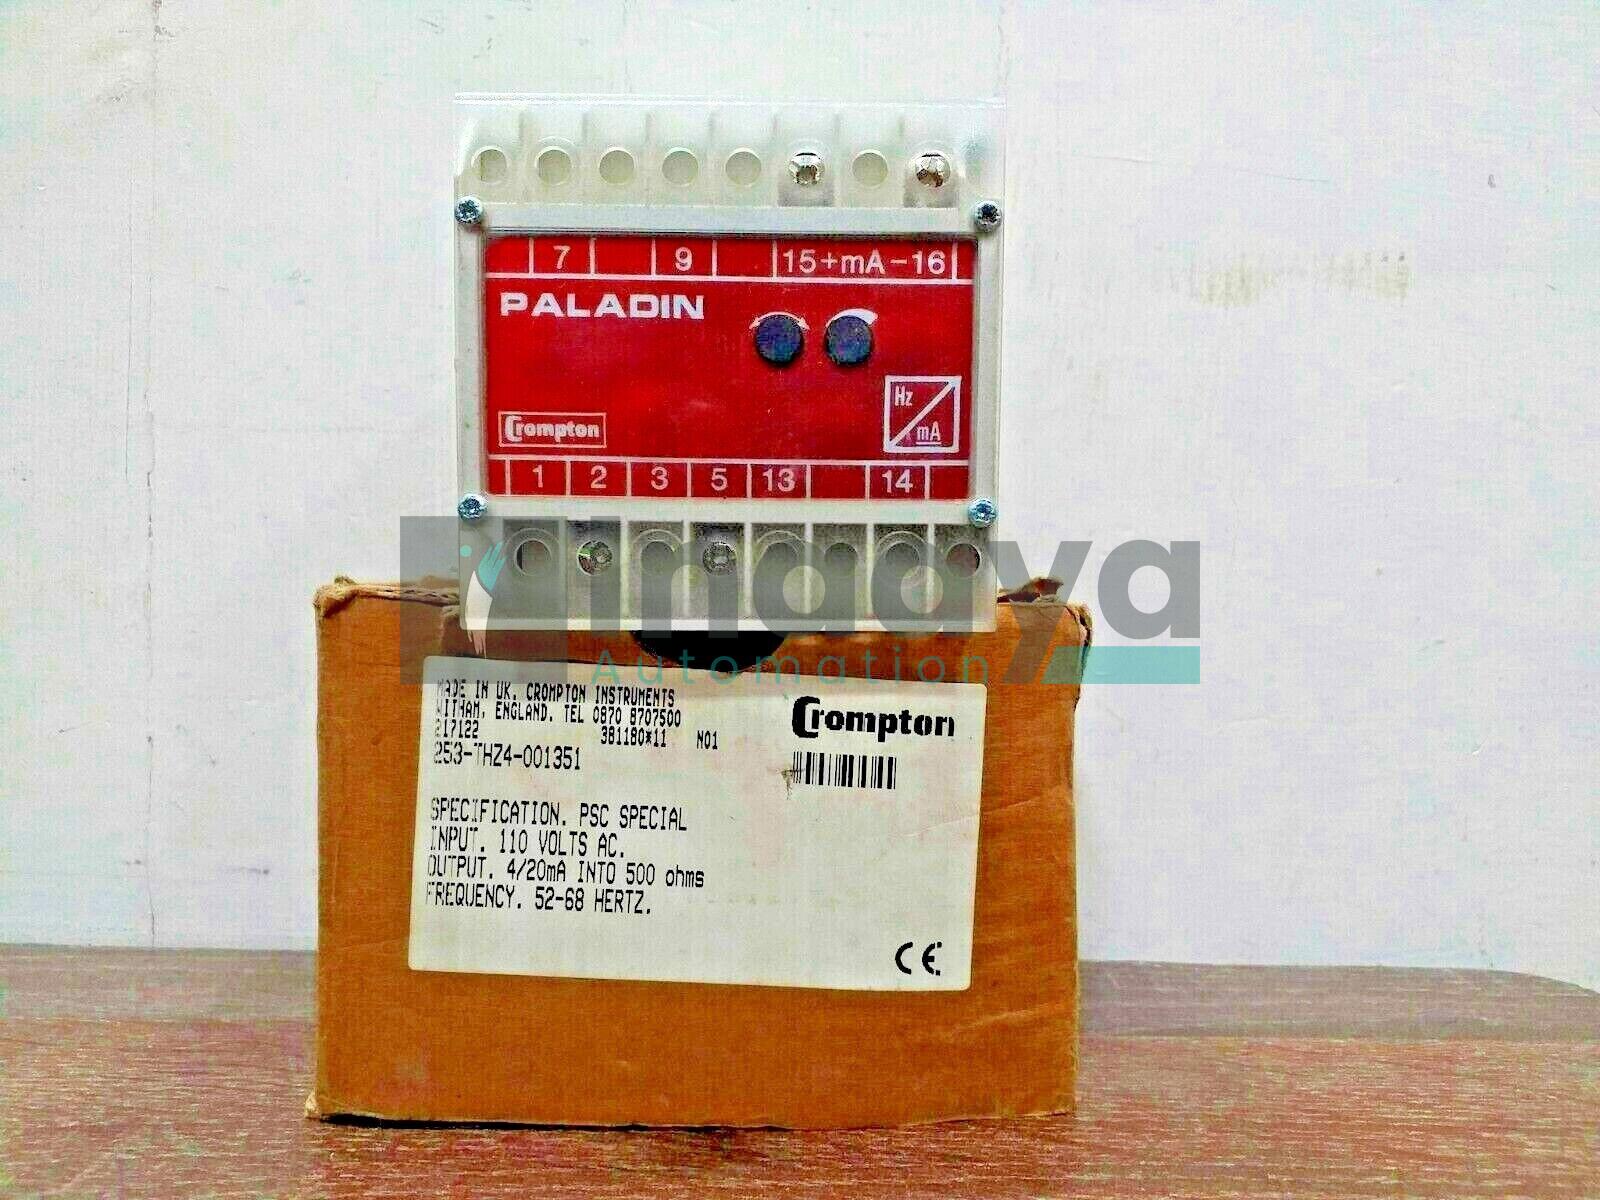 CROMPTON PALADIN 253-THZ4-001351 FREQUENCY TRANSDUCER